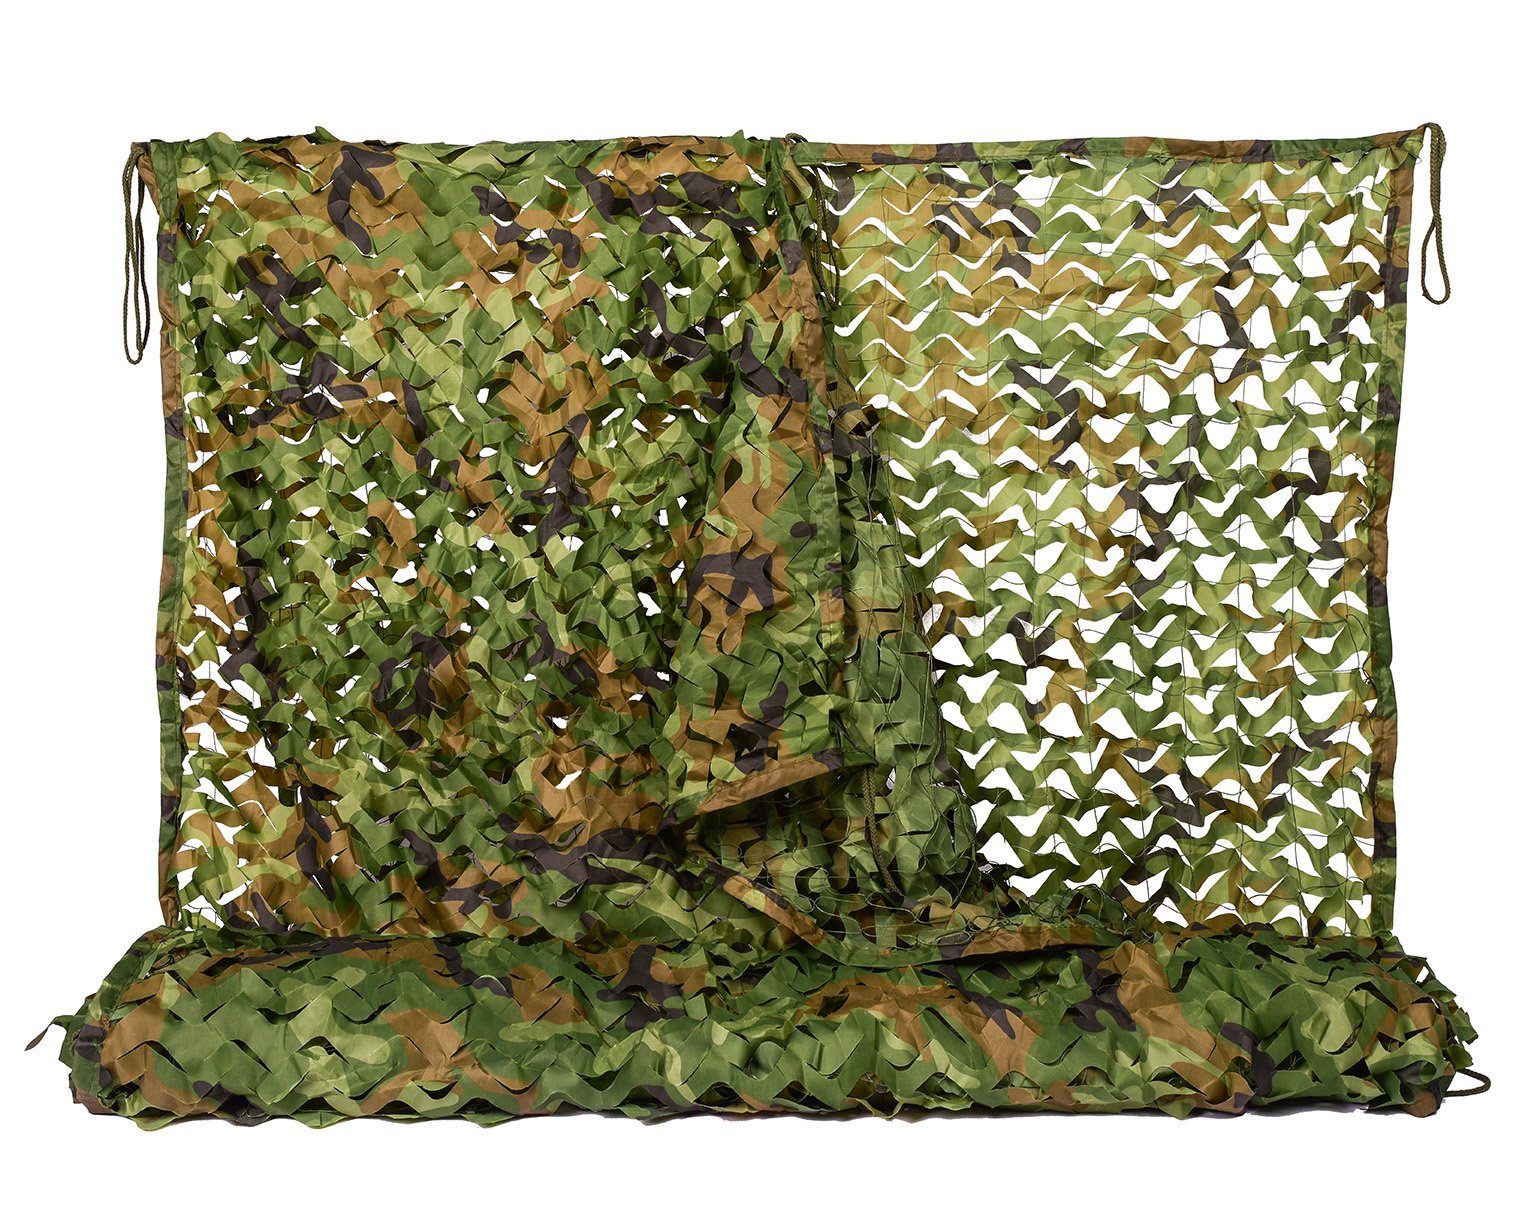 NINAT Woodland Camo Netting Camouflage Net with Nylon Mesh Net 3 x 6.5Ft -  19.6 x 19.6Ft for Camping Military Hunting Shooting Sunscreen Nets Woodland  150D 6.5ft x 10ft(2M x 3M)